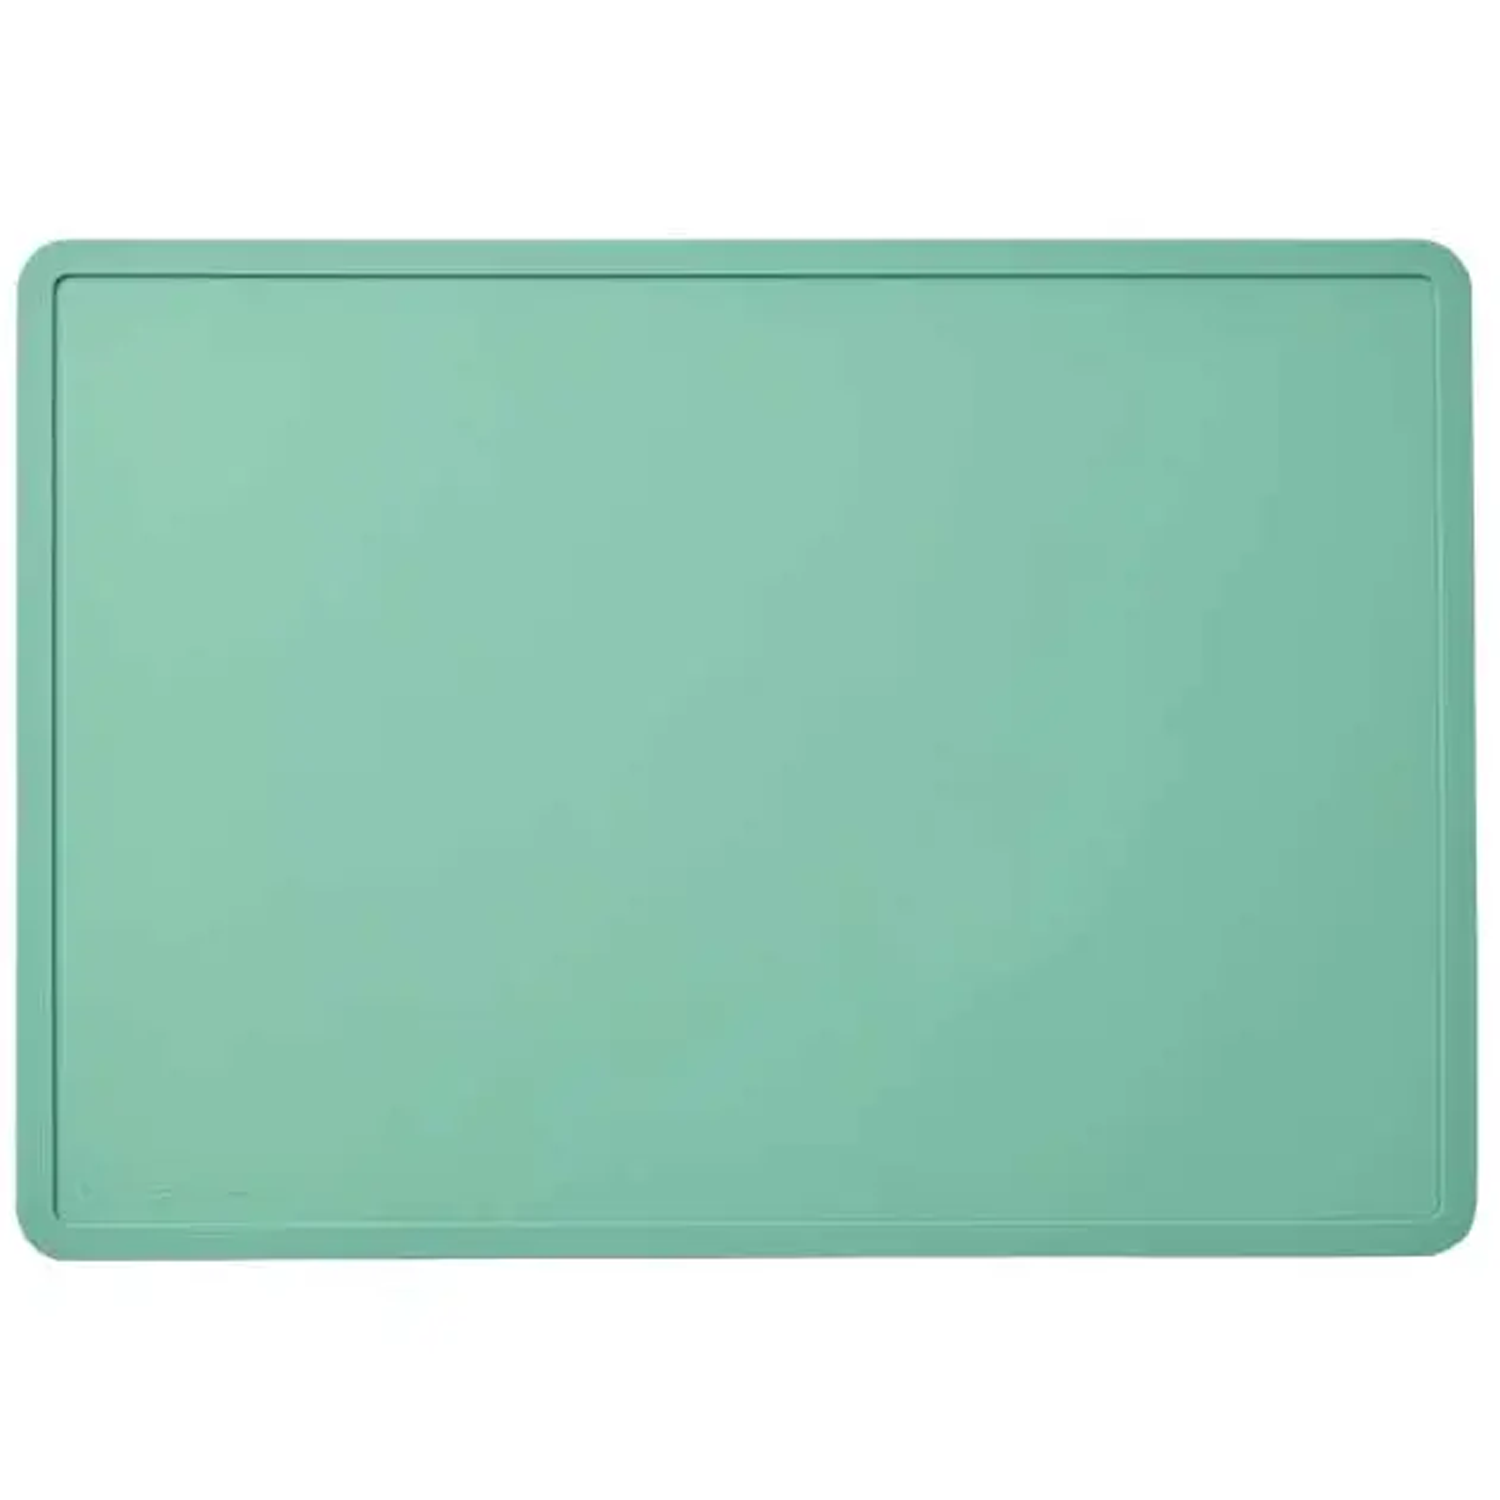 Pet Boutique - Dog Dining - Dog Bowls & Mats - Jade Silicone Dog Mat by Ore' Pet